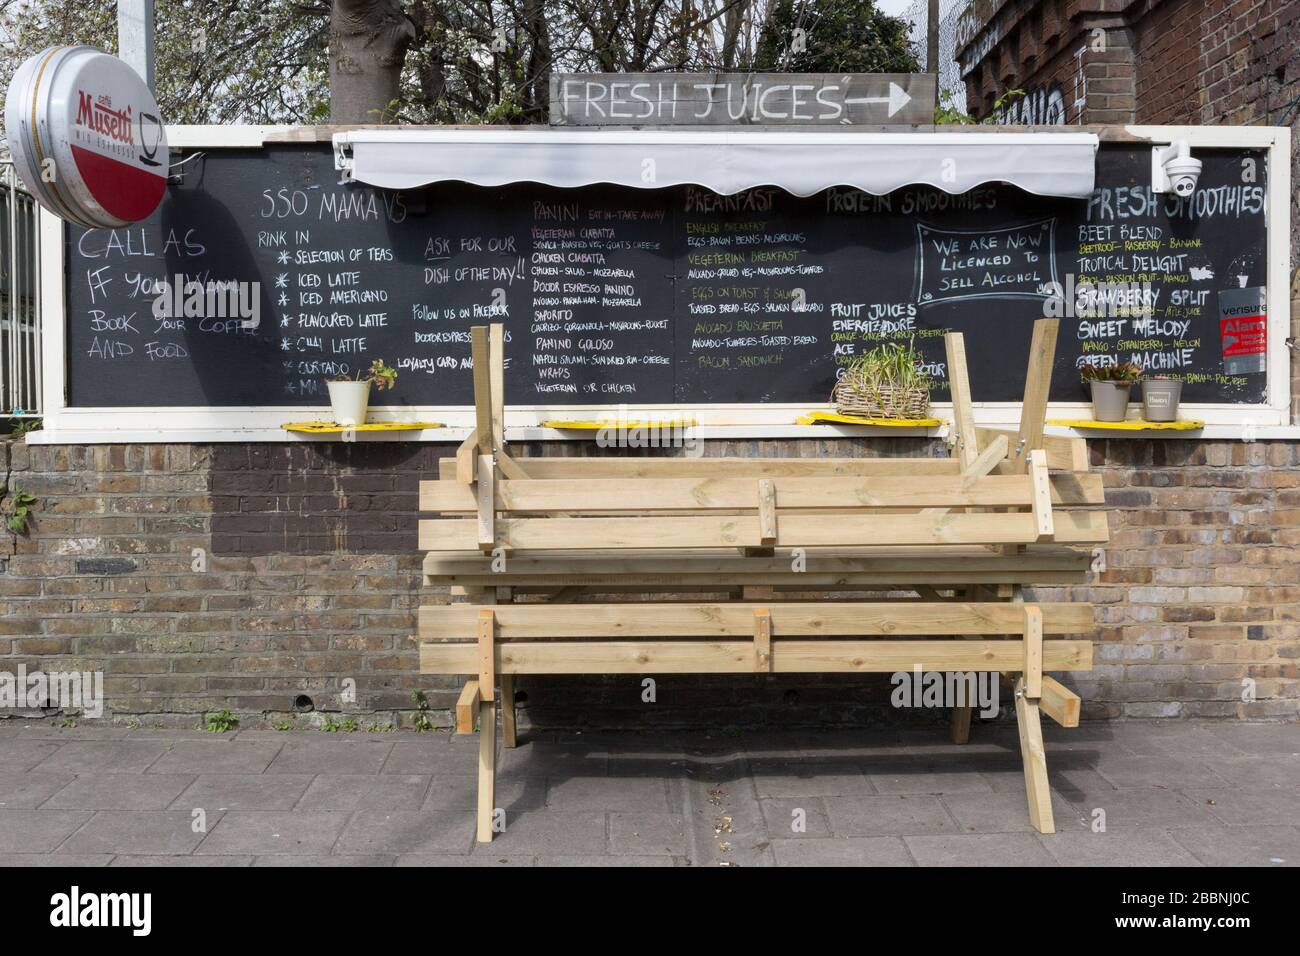 As the second week of the Coronavirus lockdown continues around the capital, and the UK death toll rising by 563 to 2,325, with 800,000 reported cases of Covid-19 worldwide, in accordance with the government's forced lockdown and closure of businesses, benches are upturned in front of daily menu for drinks and food snacks outside a cafe near the local Overground station on Clapham High Street, on 1st April 2020, in south London, England. Stock Photo